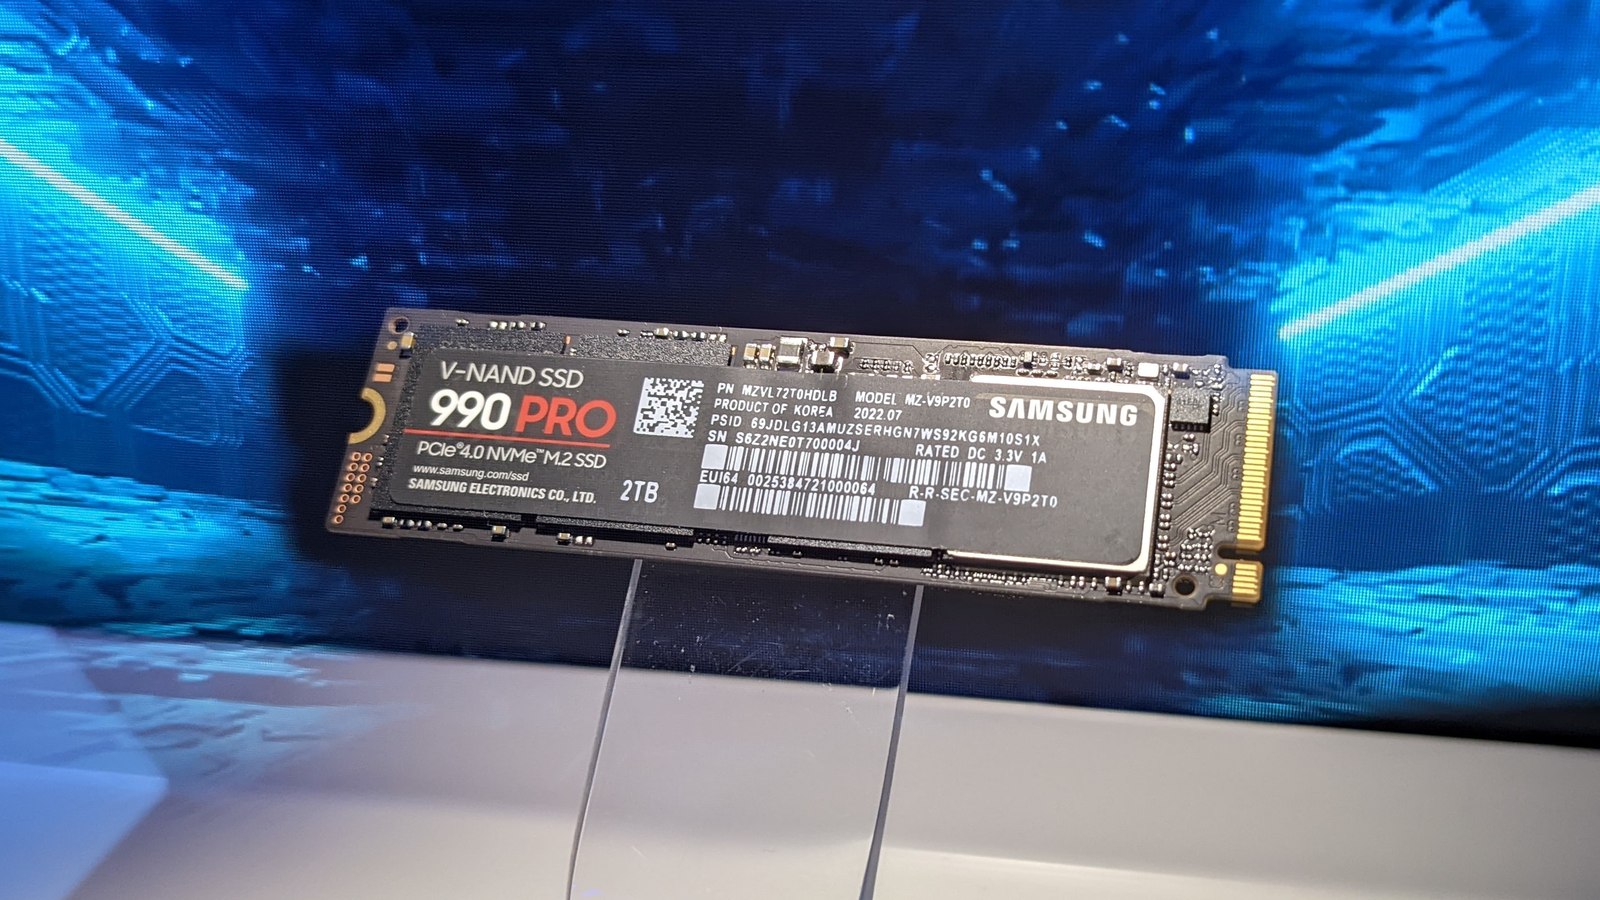 The Samsung 990 Pro is now the fastest NVMe M.2 SSD